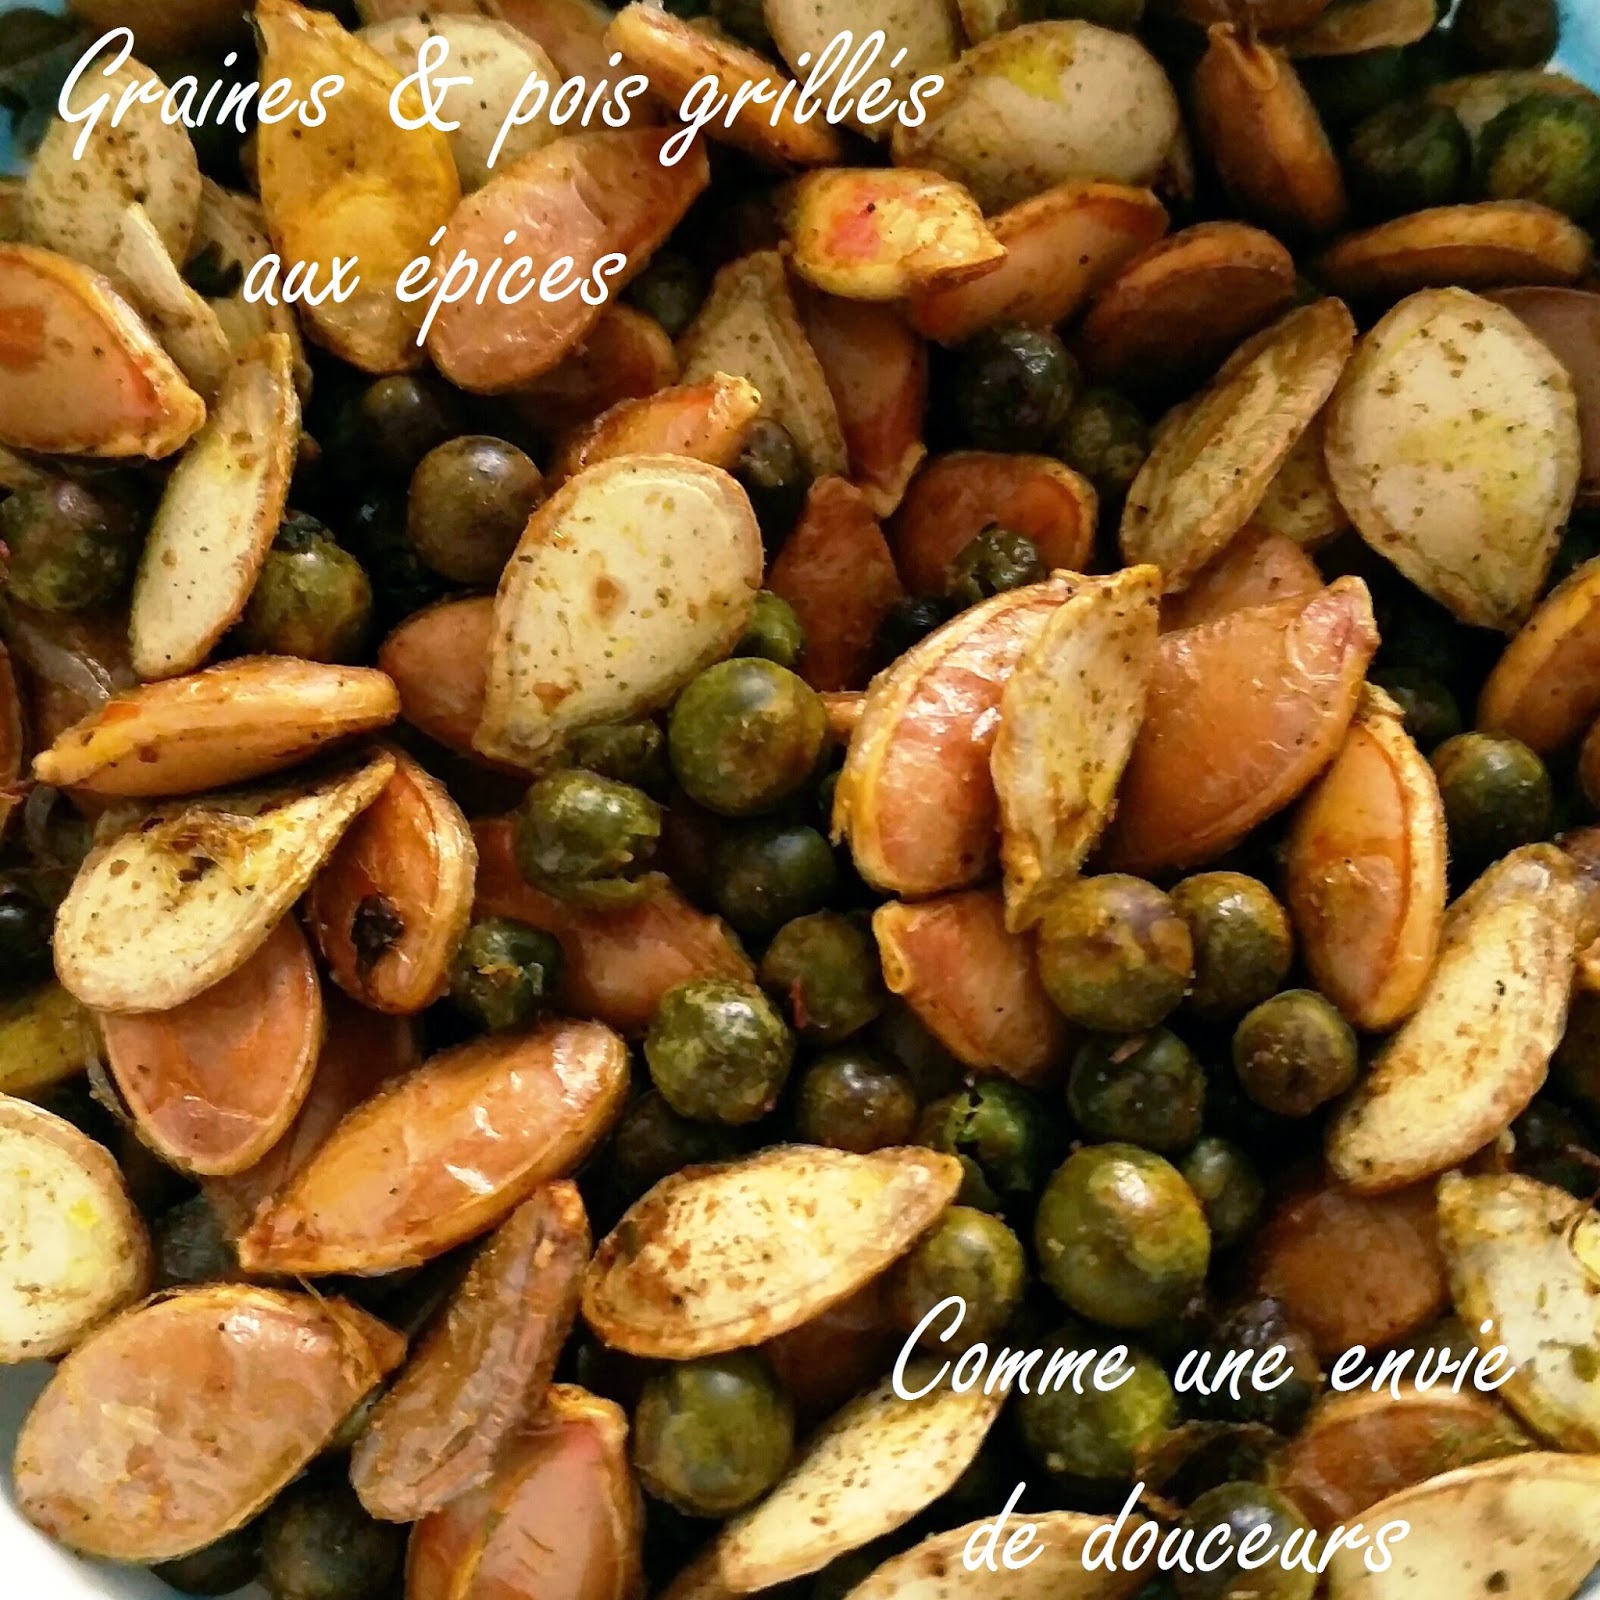 Graines et pois grillés – Grilled peas and seeds